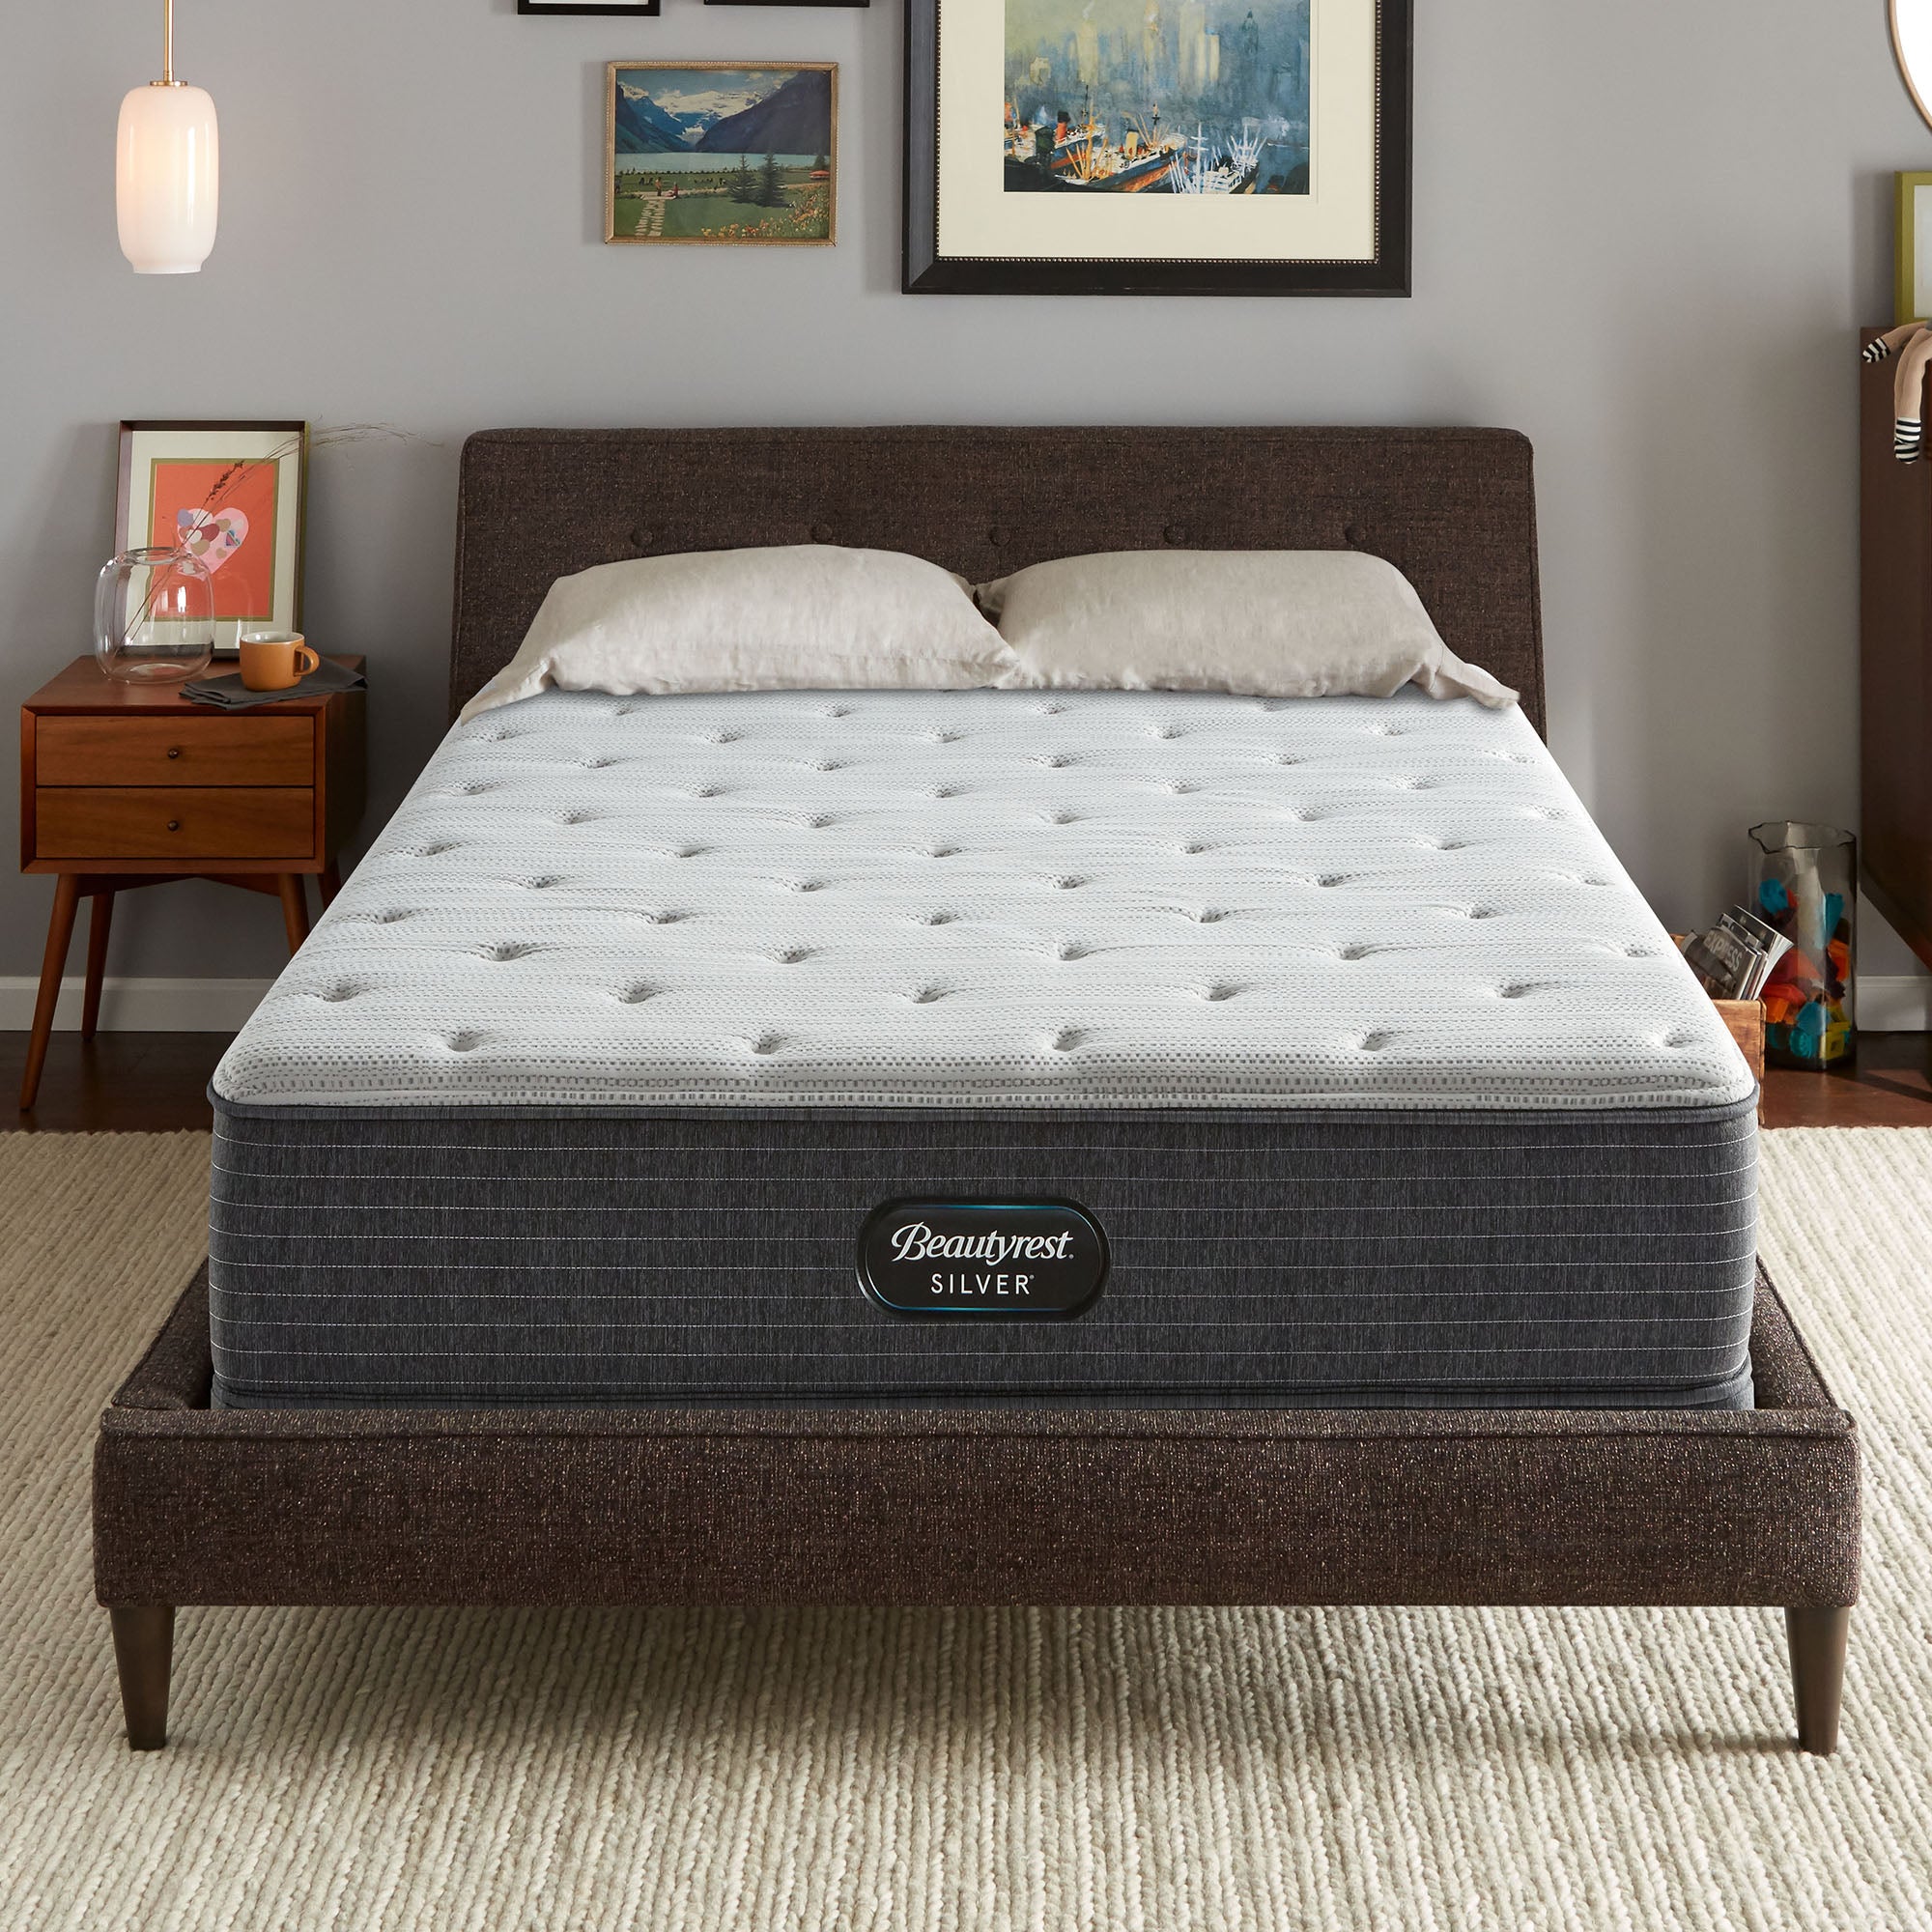 The Beautyrest Silver BRS900 Medium mattress in a bedroom on a brown bed